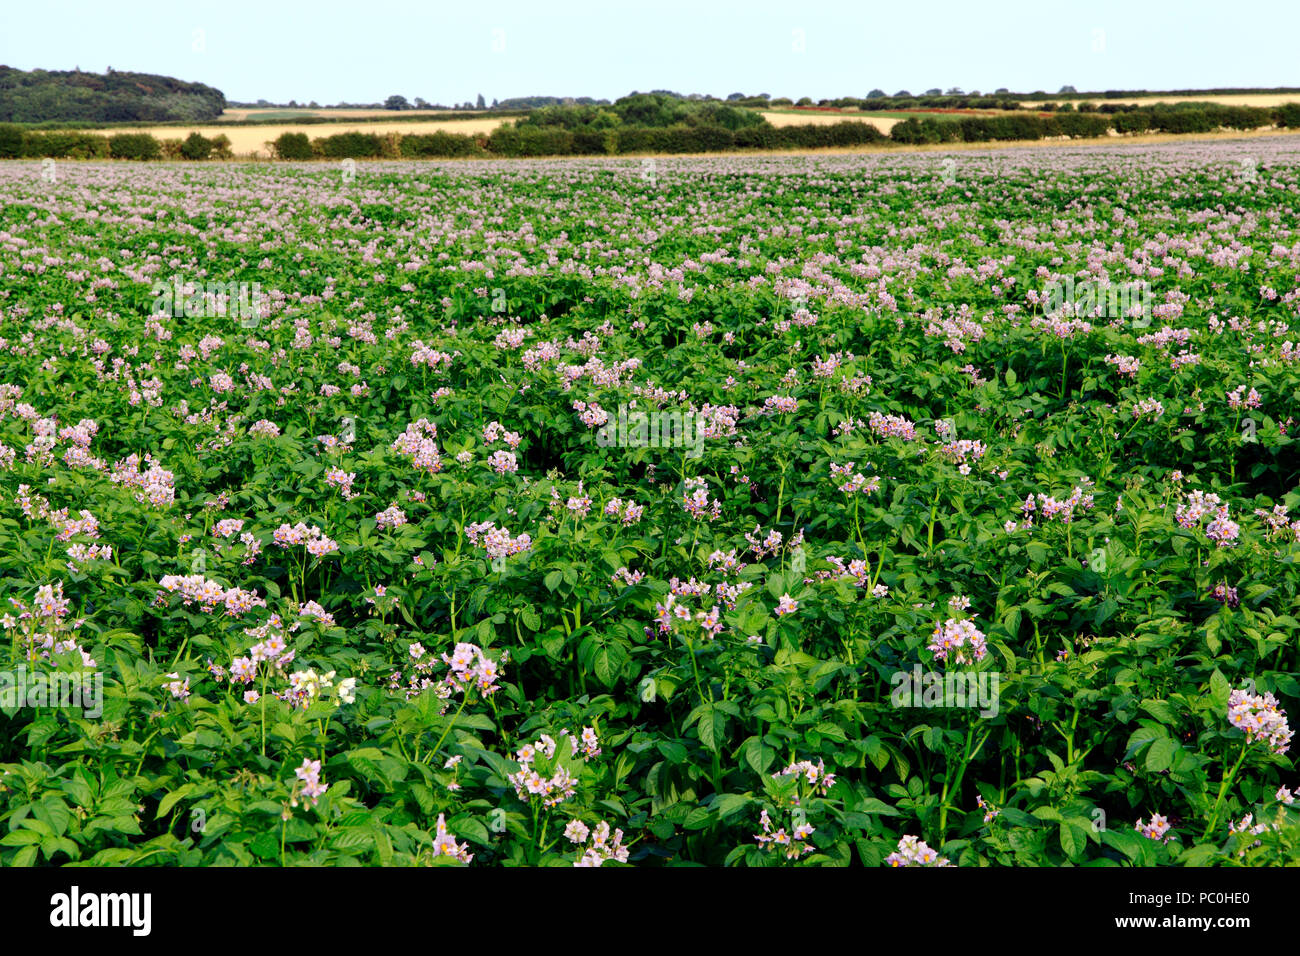 Potato field, in flower, agricultural planting, root vegetable, potatoes,  landscape, Norfolk, UK Stock Photo